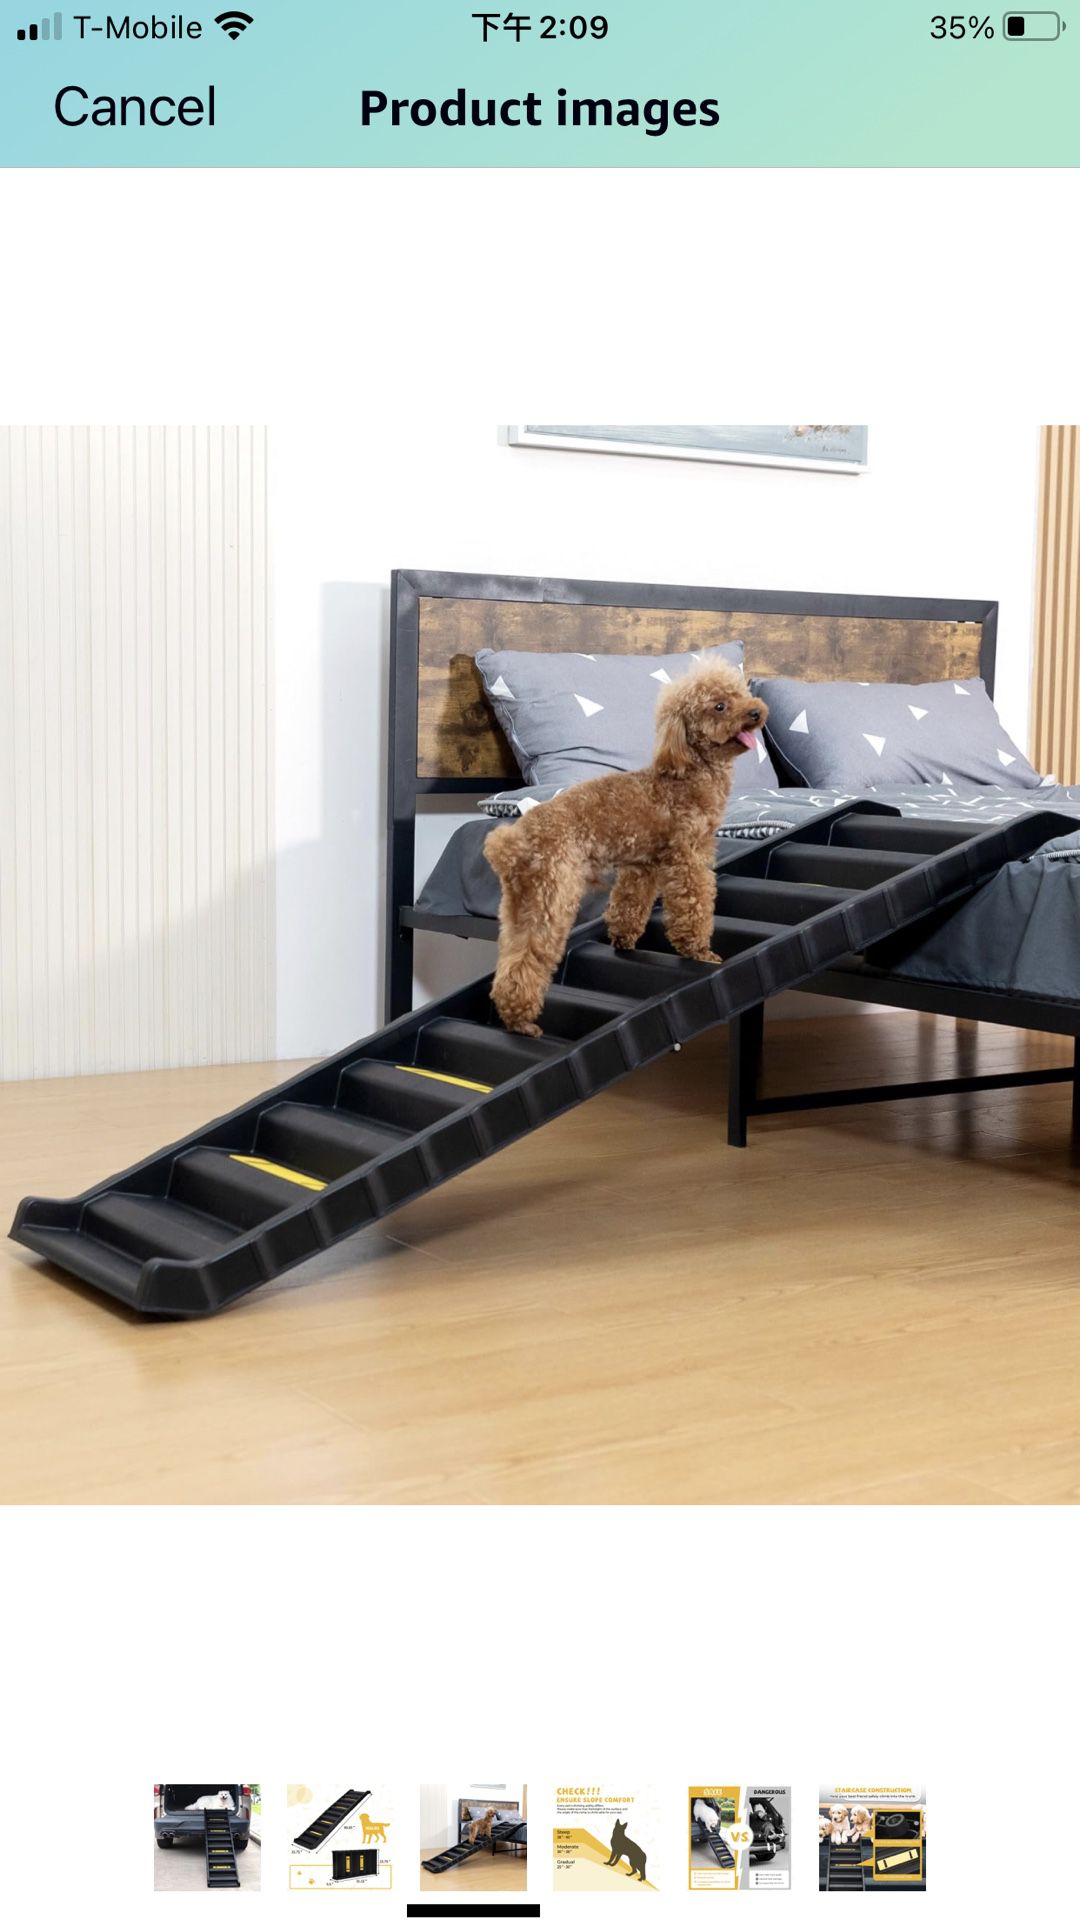 Portable Dog Car Ramps 61" L Folding High Traction Pet Stairs for Vehicles,SUV/Truck,Lightweight Ladder Ramp for Dogs Old Cats to High Bed,Couch-Easy 